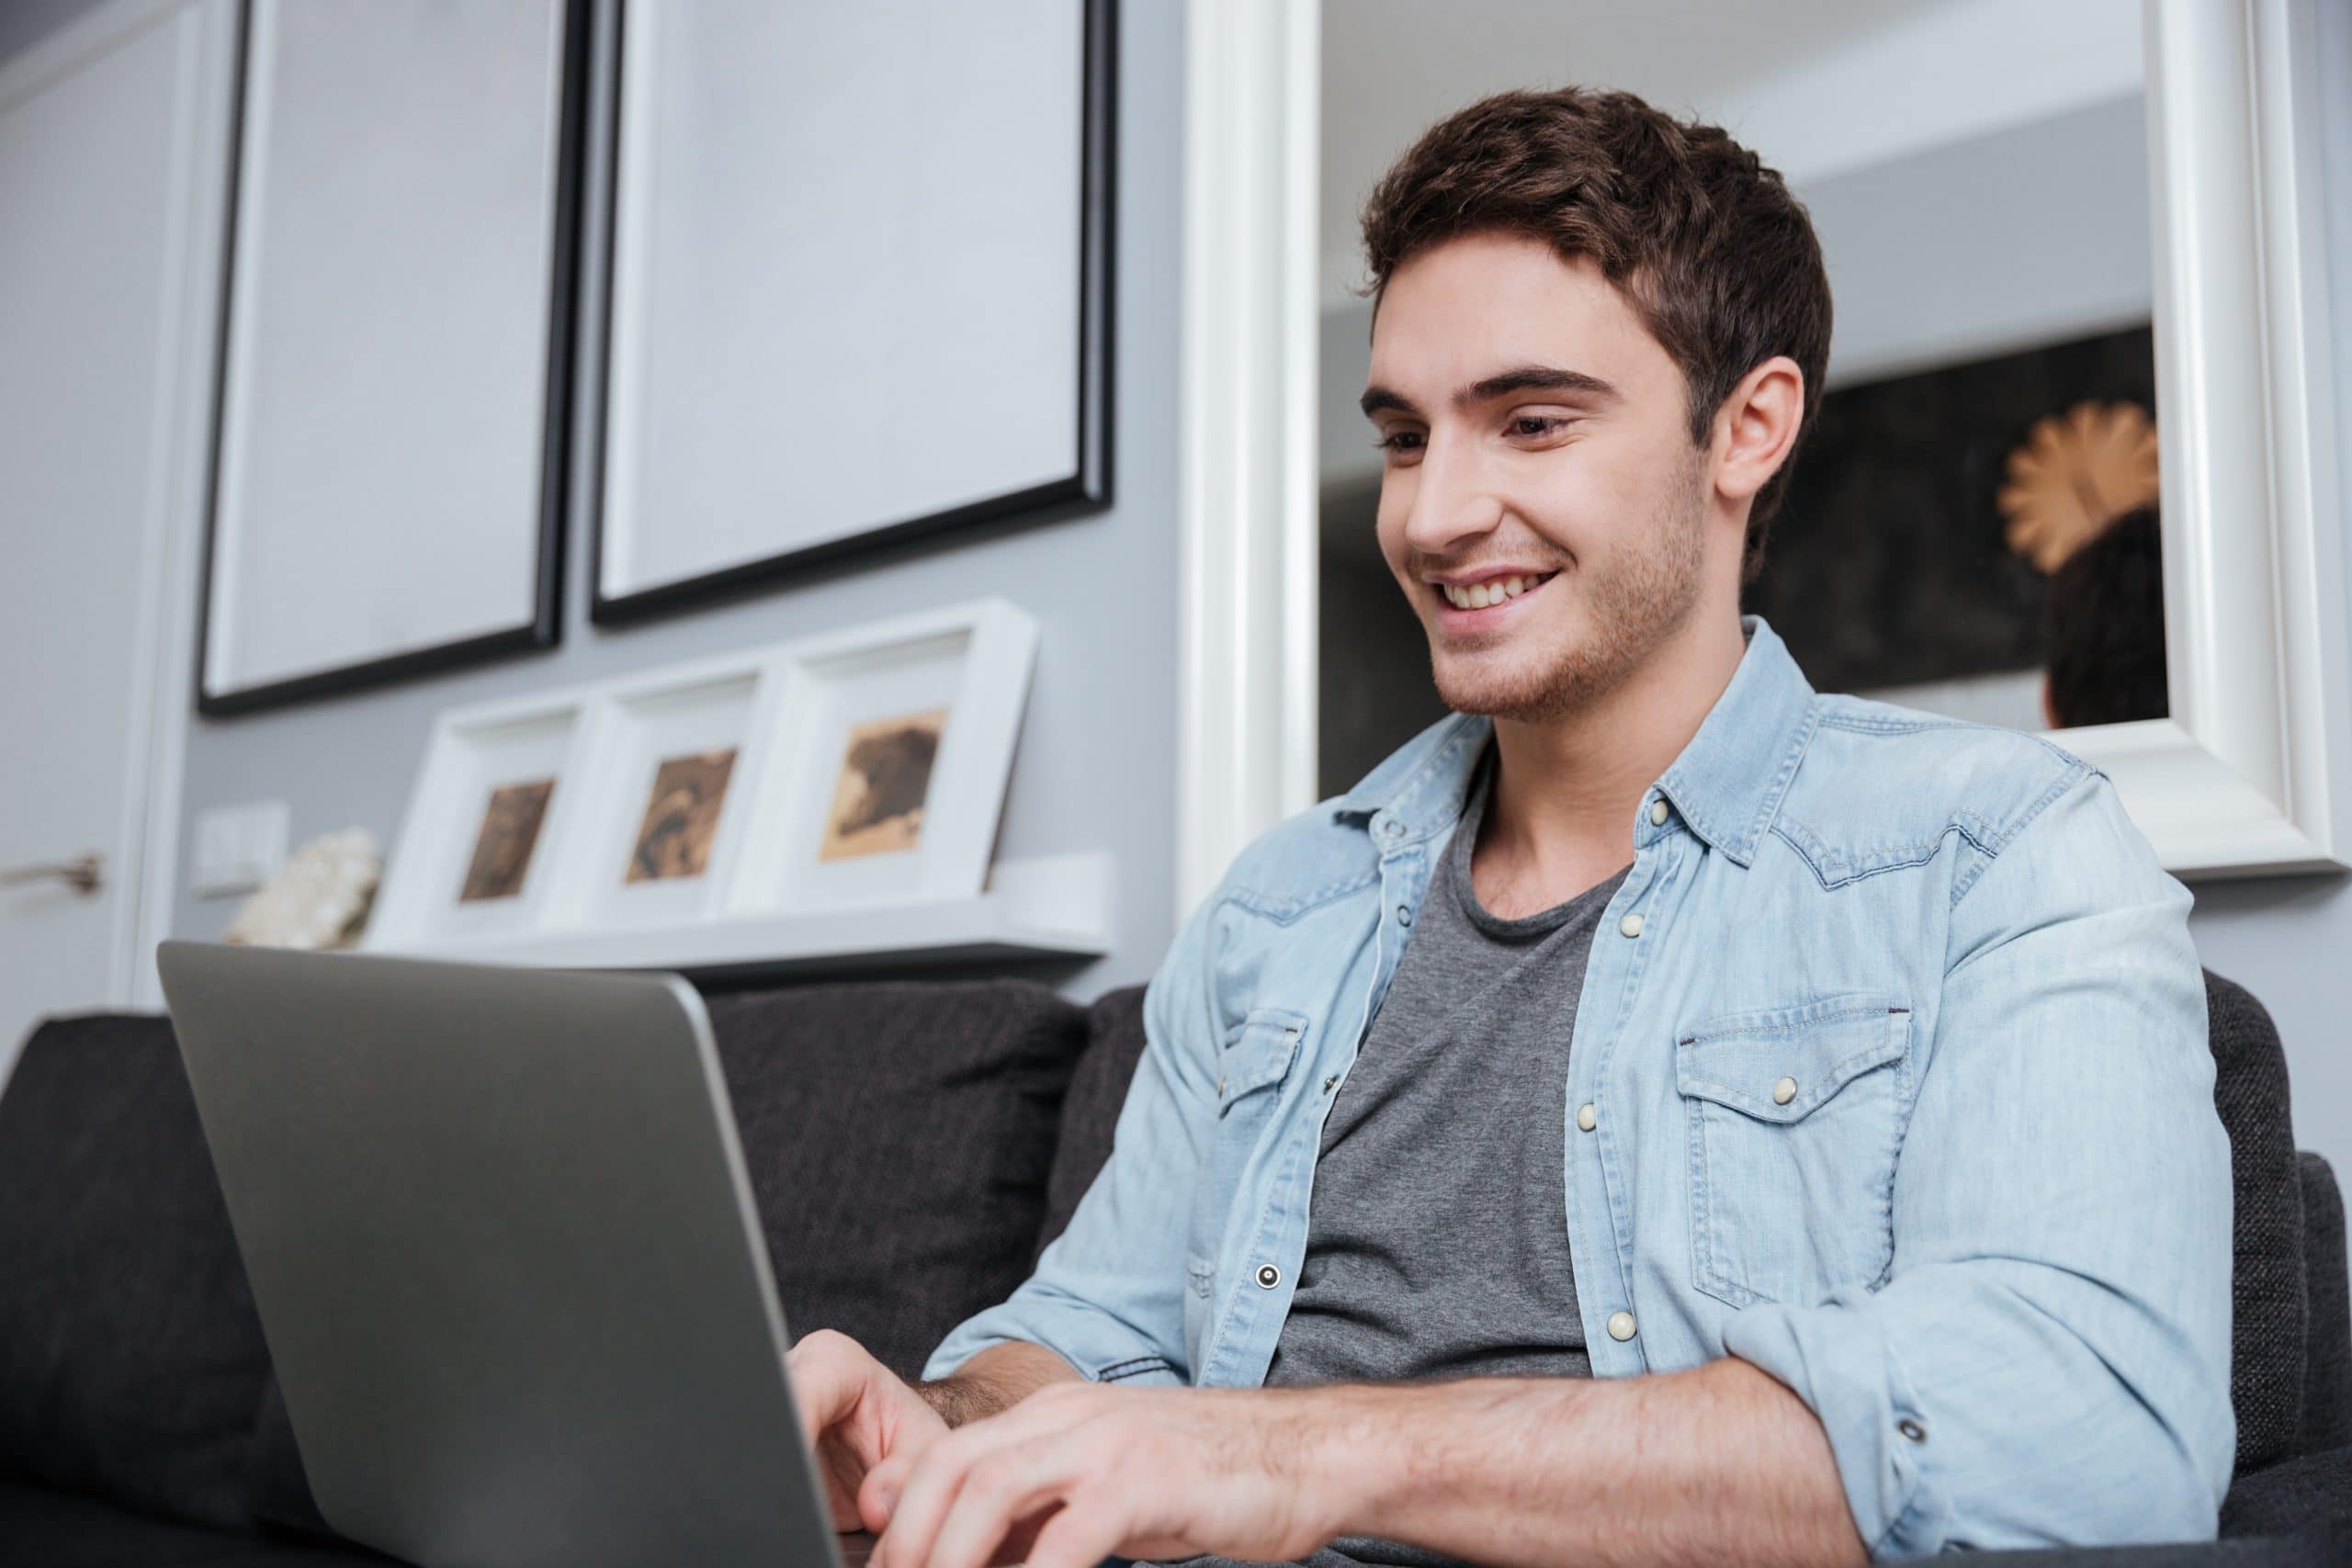 A young man smiling and working on his laptop while sitting on a couch in his living room